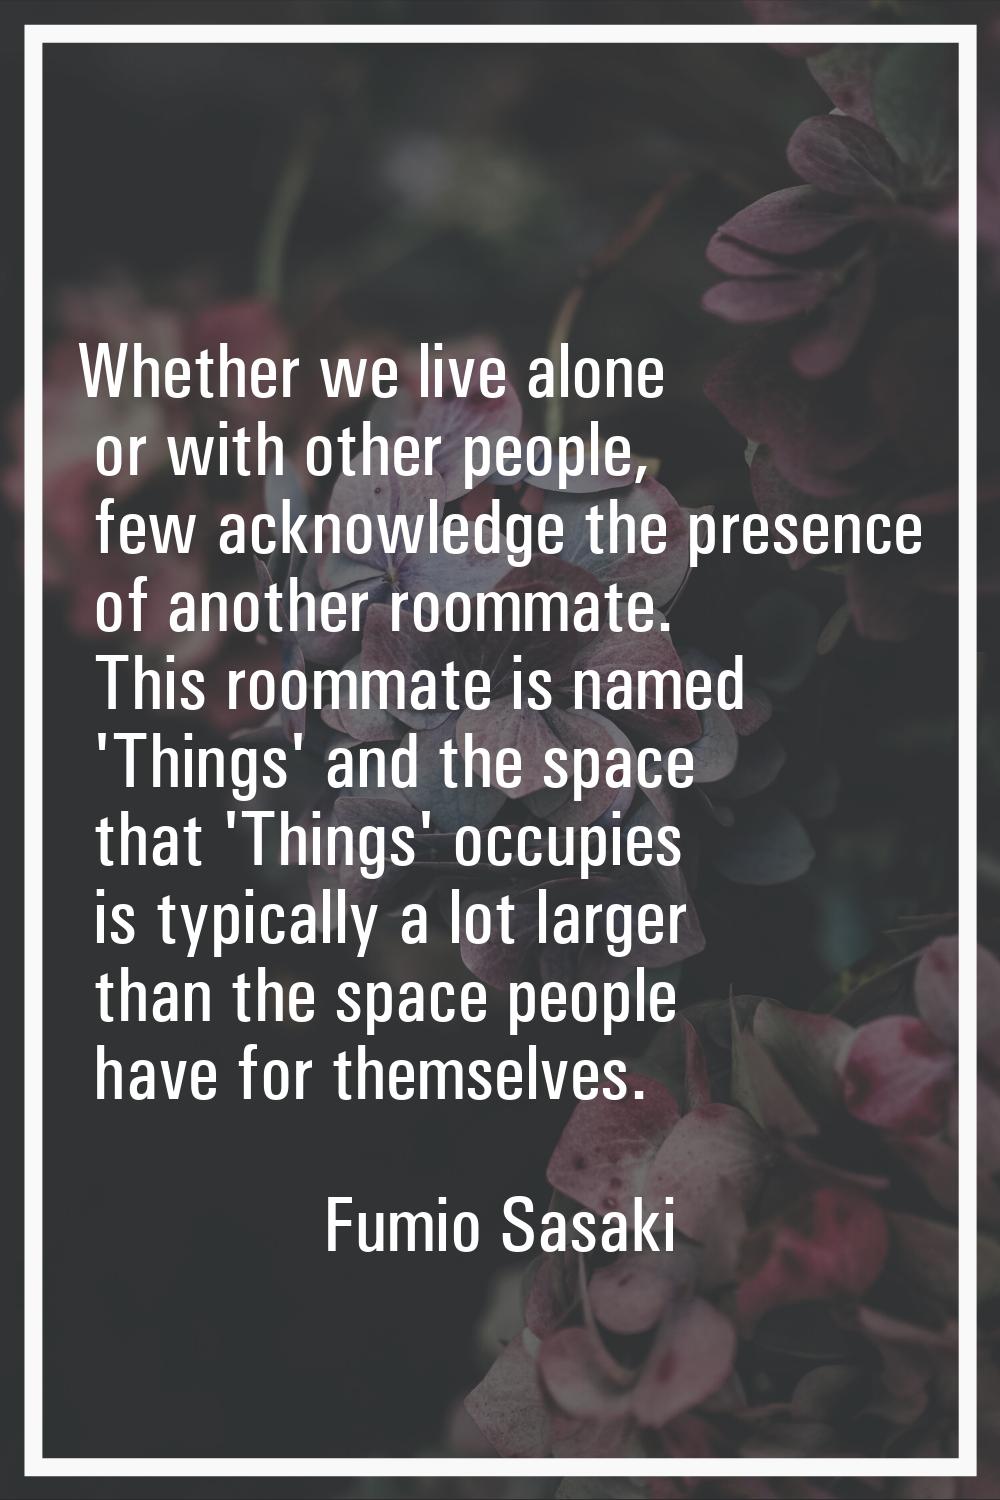 Whether we live alone or with other people, few acknowledge the presence of another roommate. This 